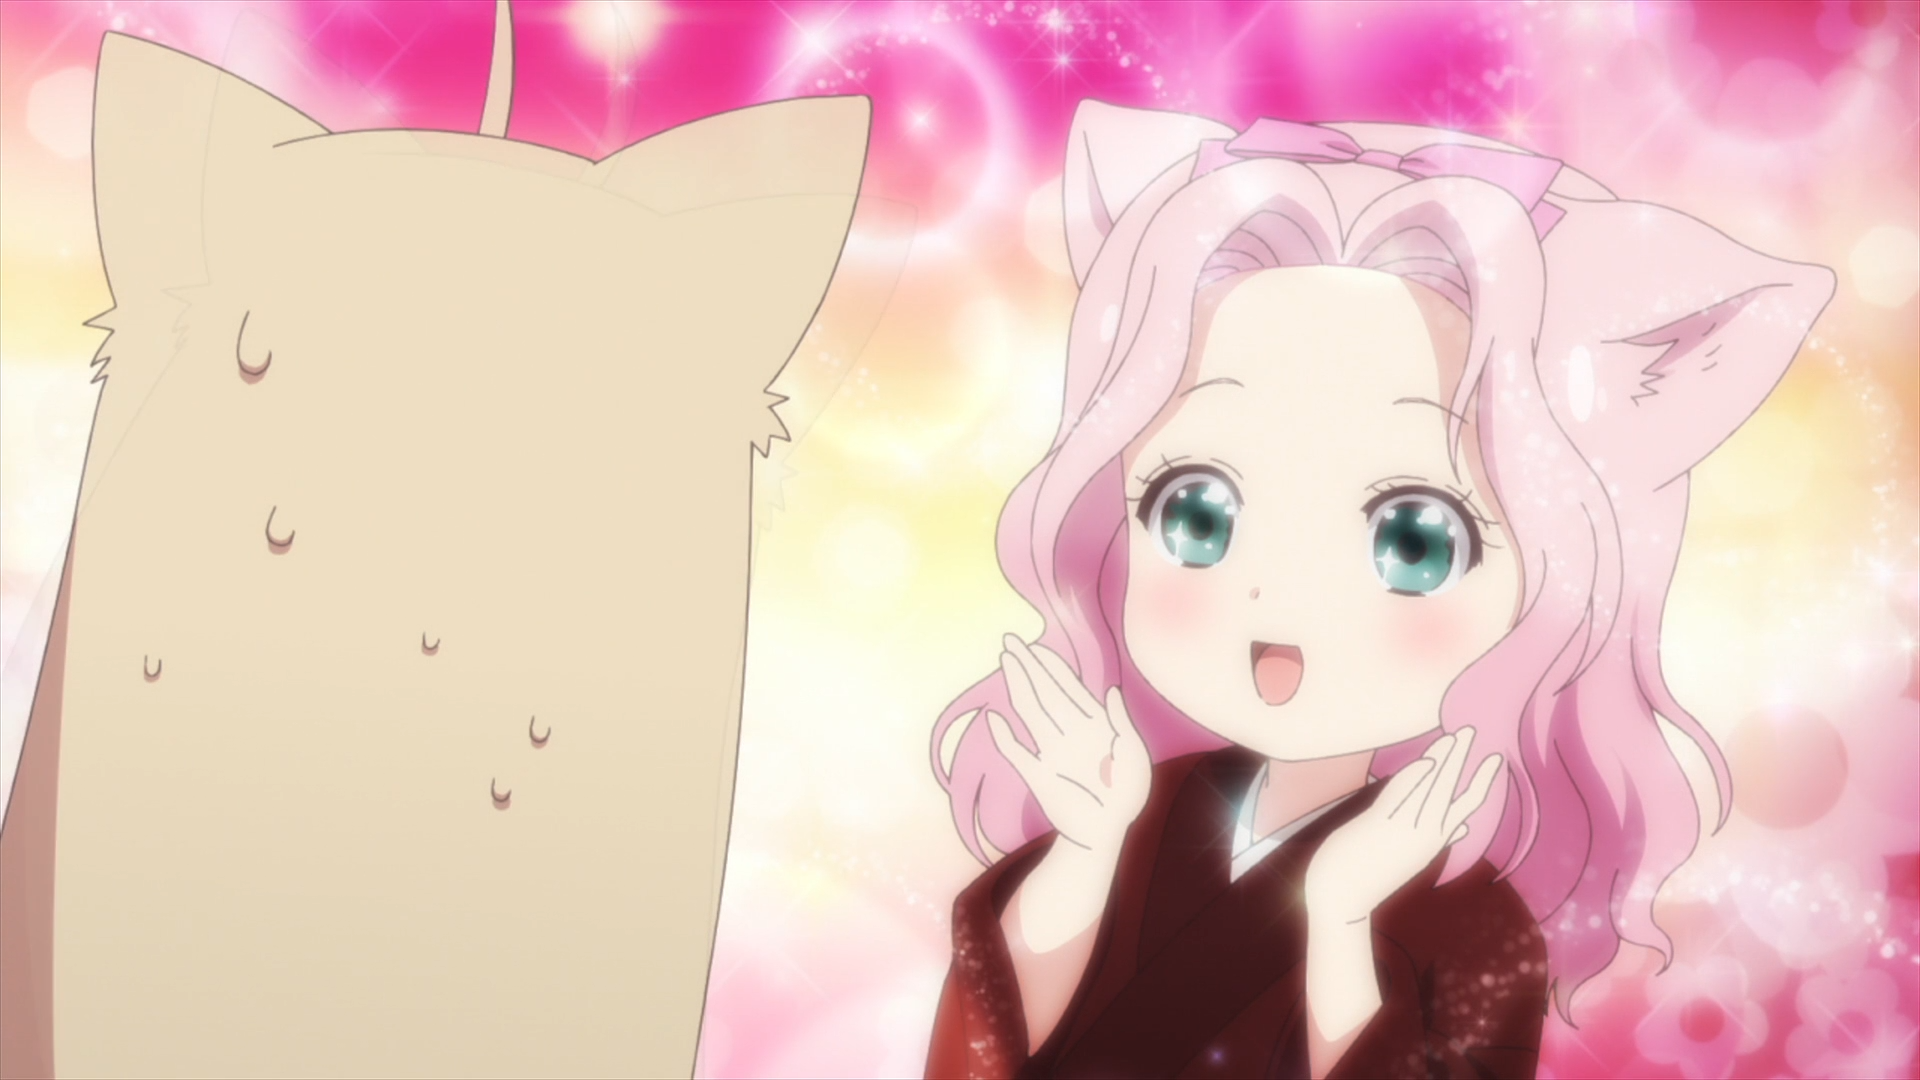 Ren puts on a sparkly-eyed expression to make a good impression on Yuzu in a scene from the 2017 KONOHANA KITAN TV anime.